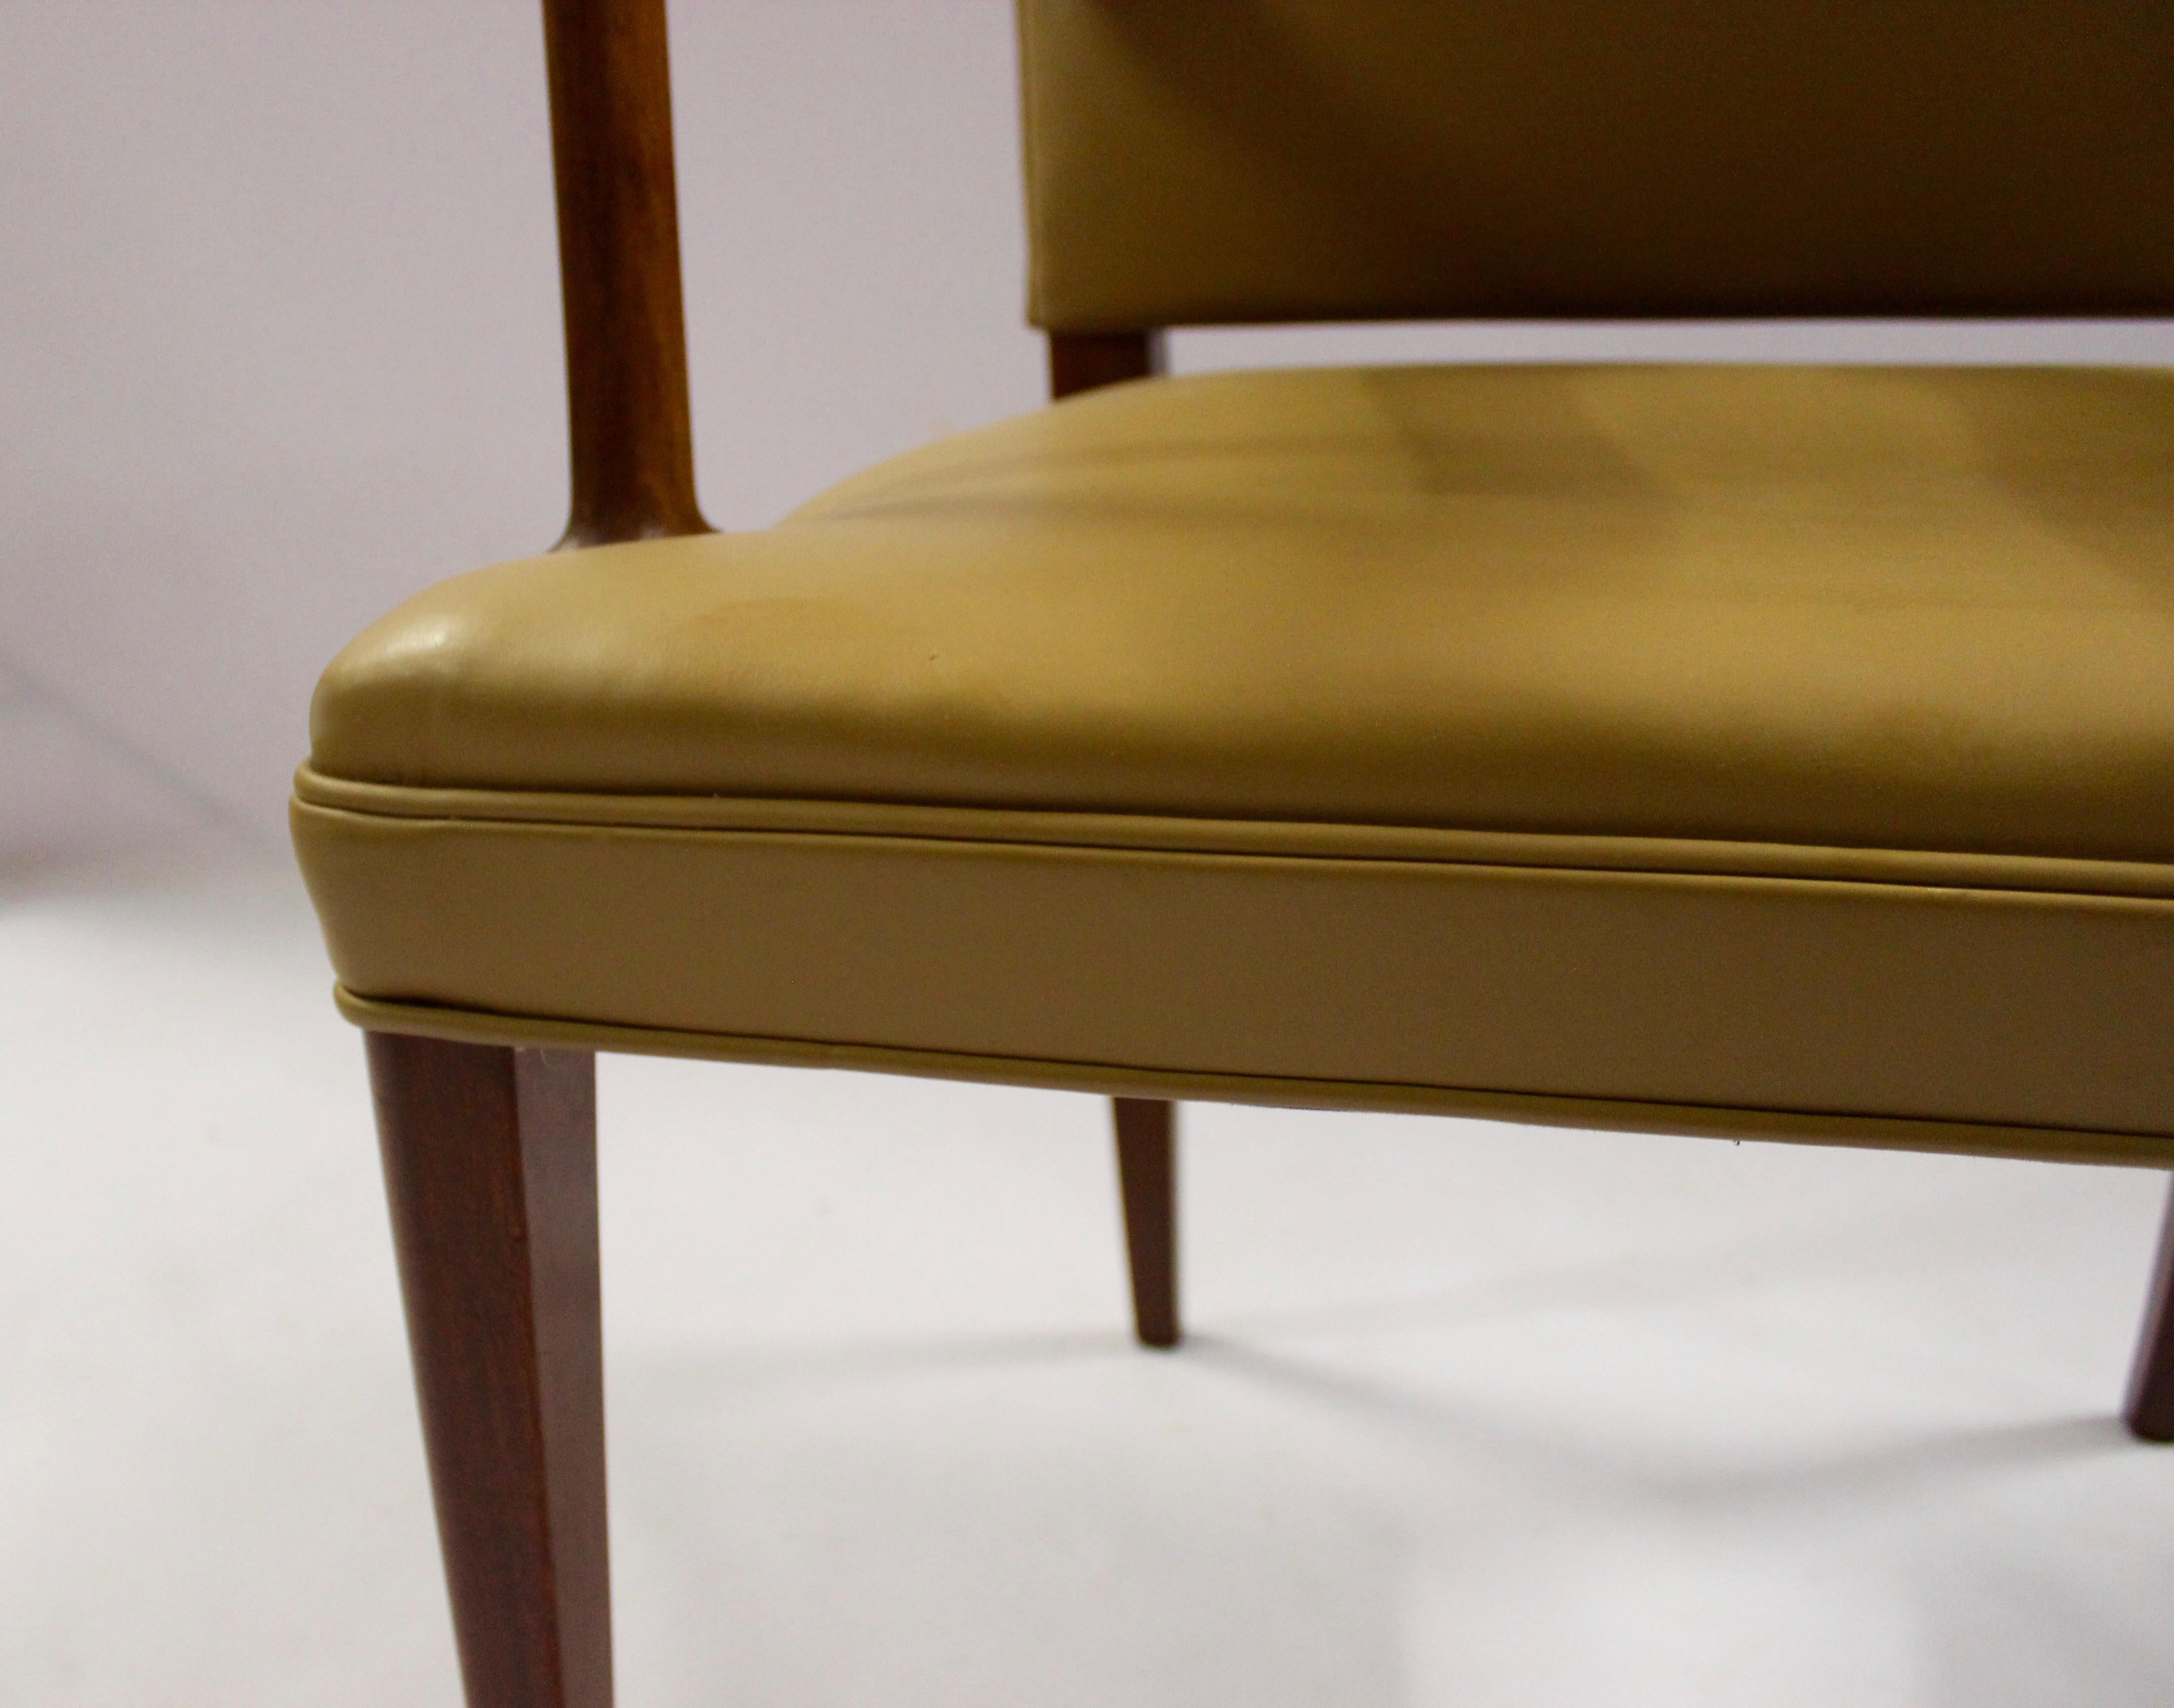 Armchair in Mahogany and Light Leather by Jacob Kjær from the 1950s In Good Condition For Sale In Lejre, DK